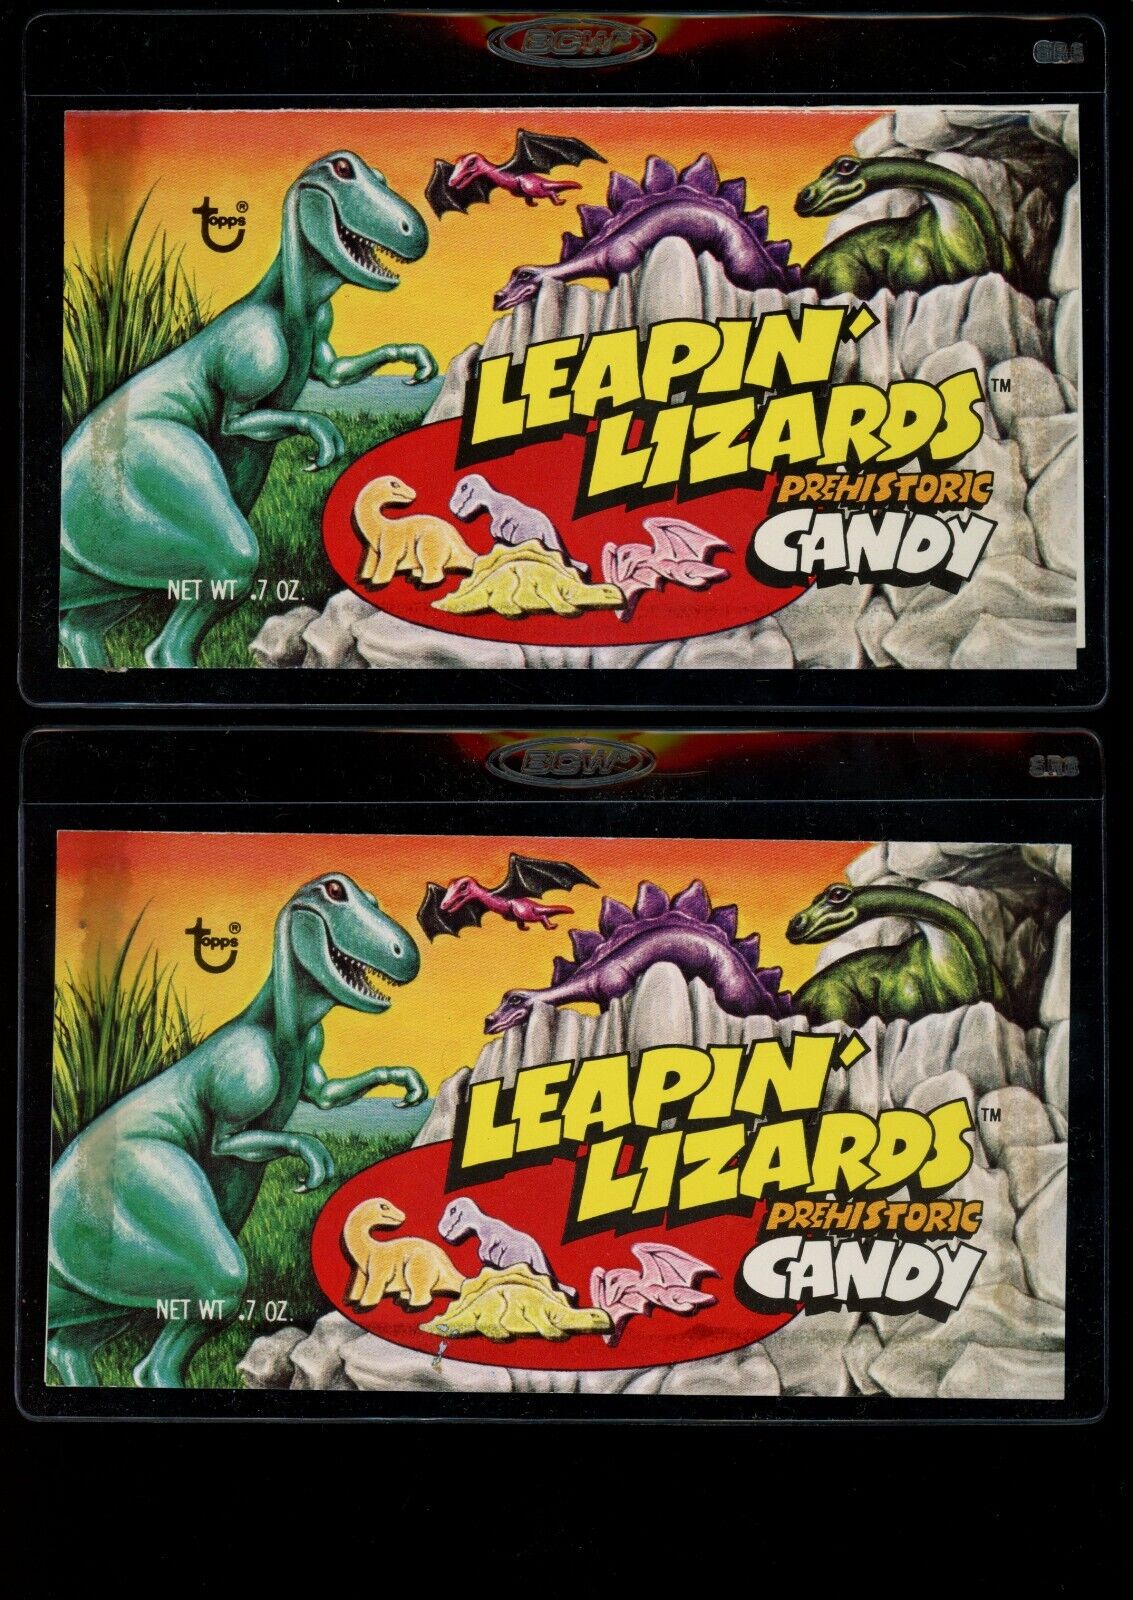 1976 Topps Leapin' Lizards Prehistoric Candy Test Issue Wrapper Complete Set 1/1